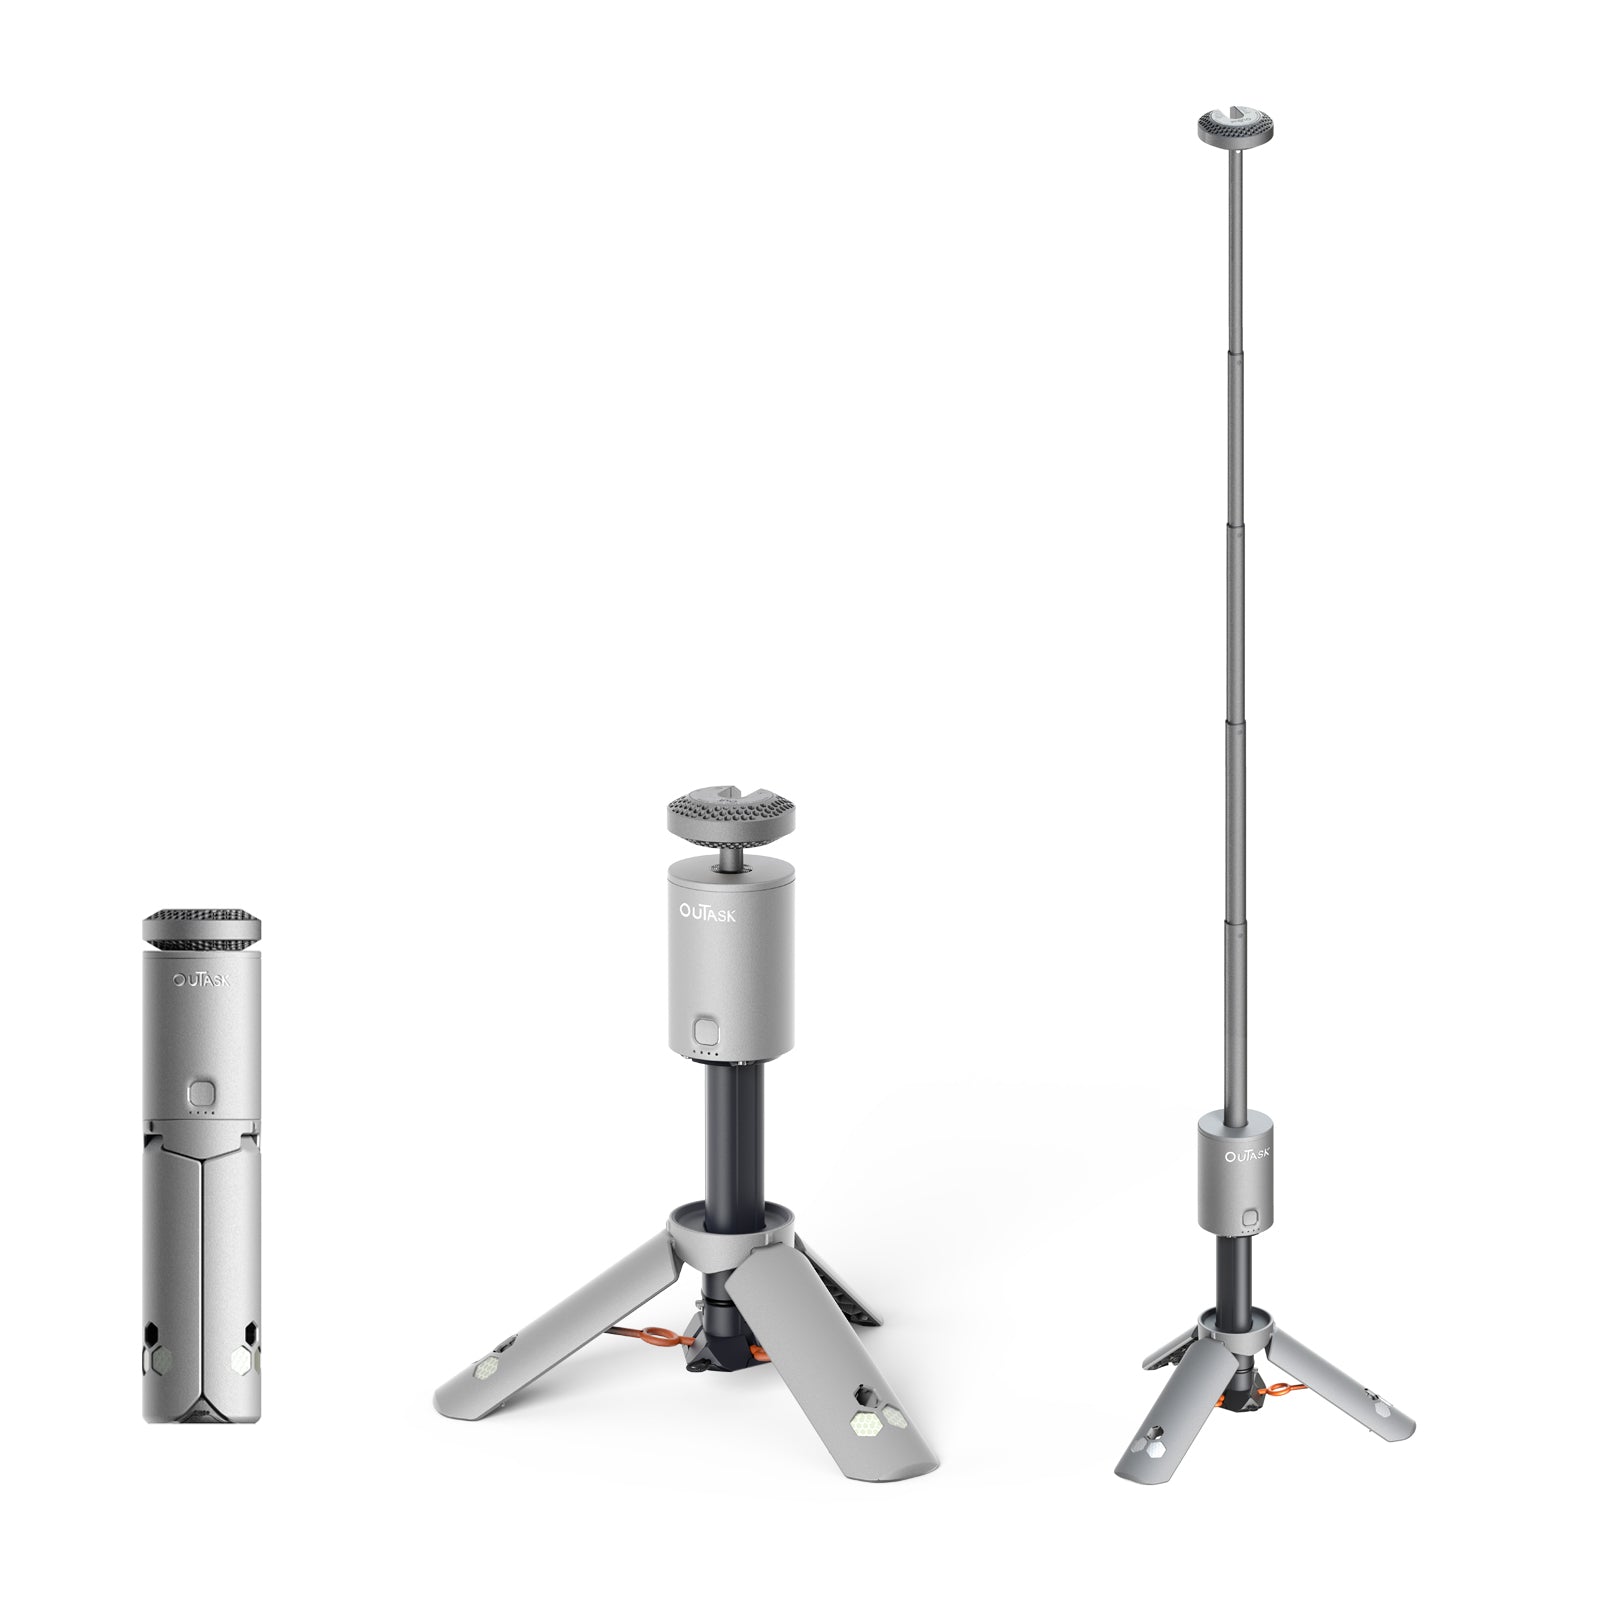 OUTASK TELESCOPIC LANTERN : THE NEW WORLD OF MOBILE LIGHTING